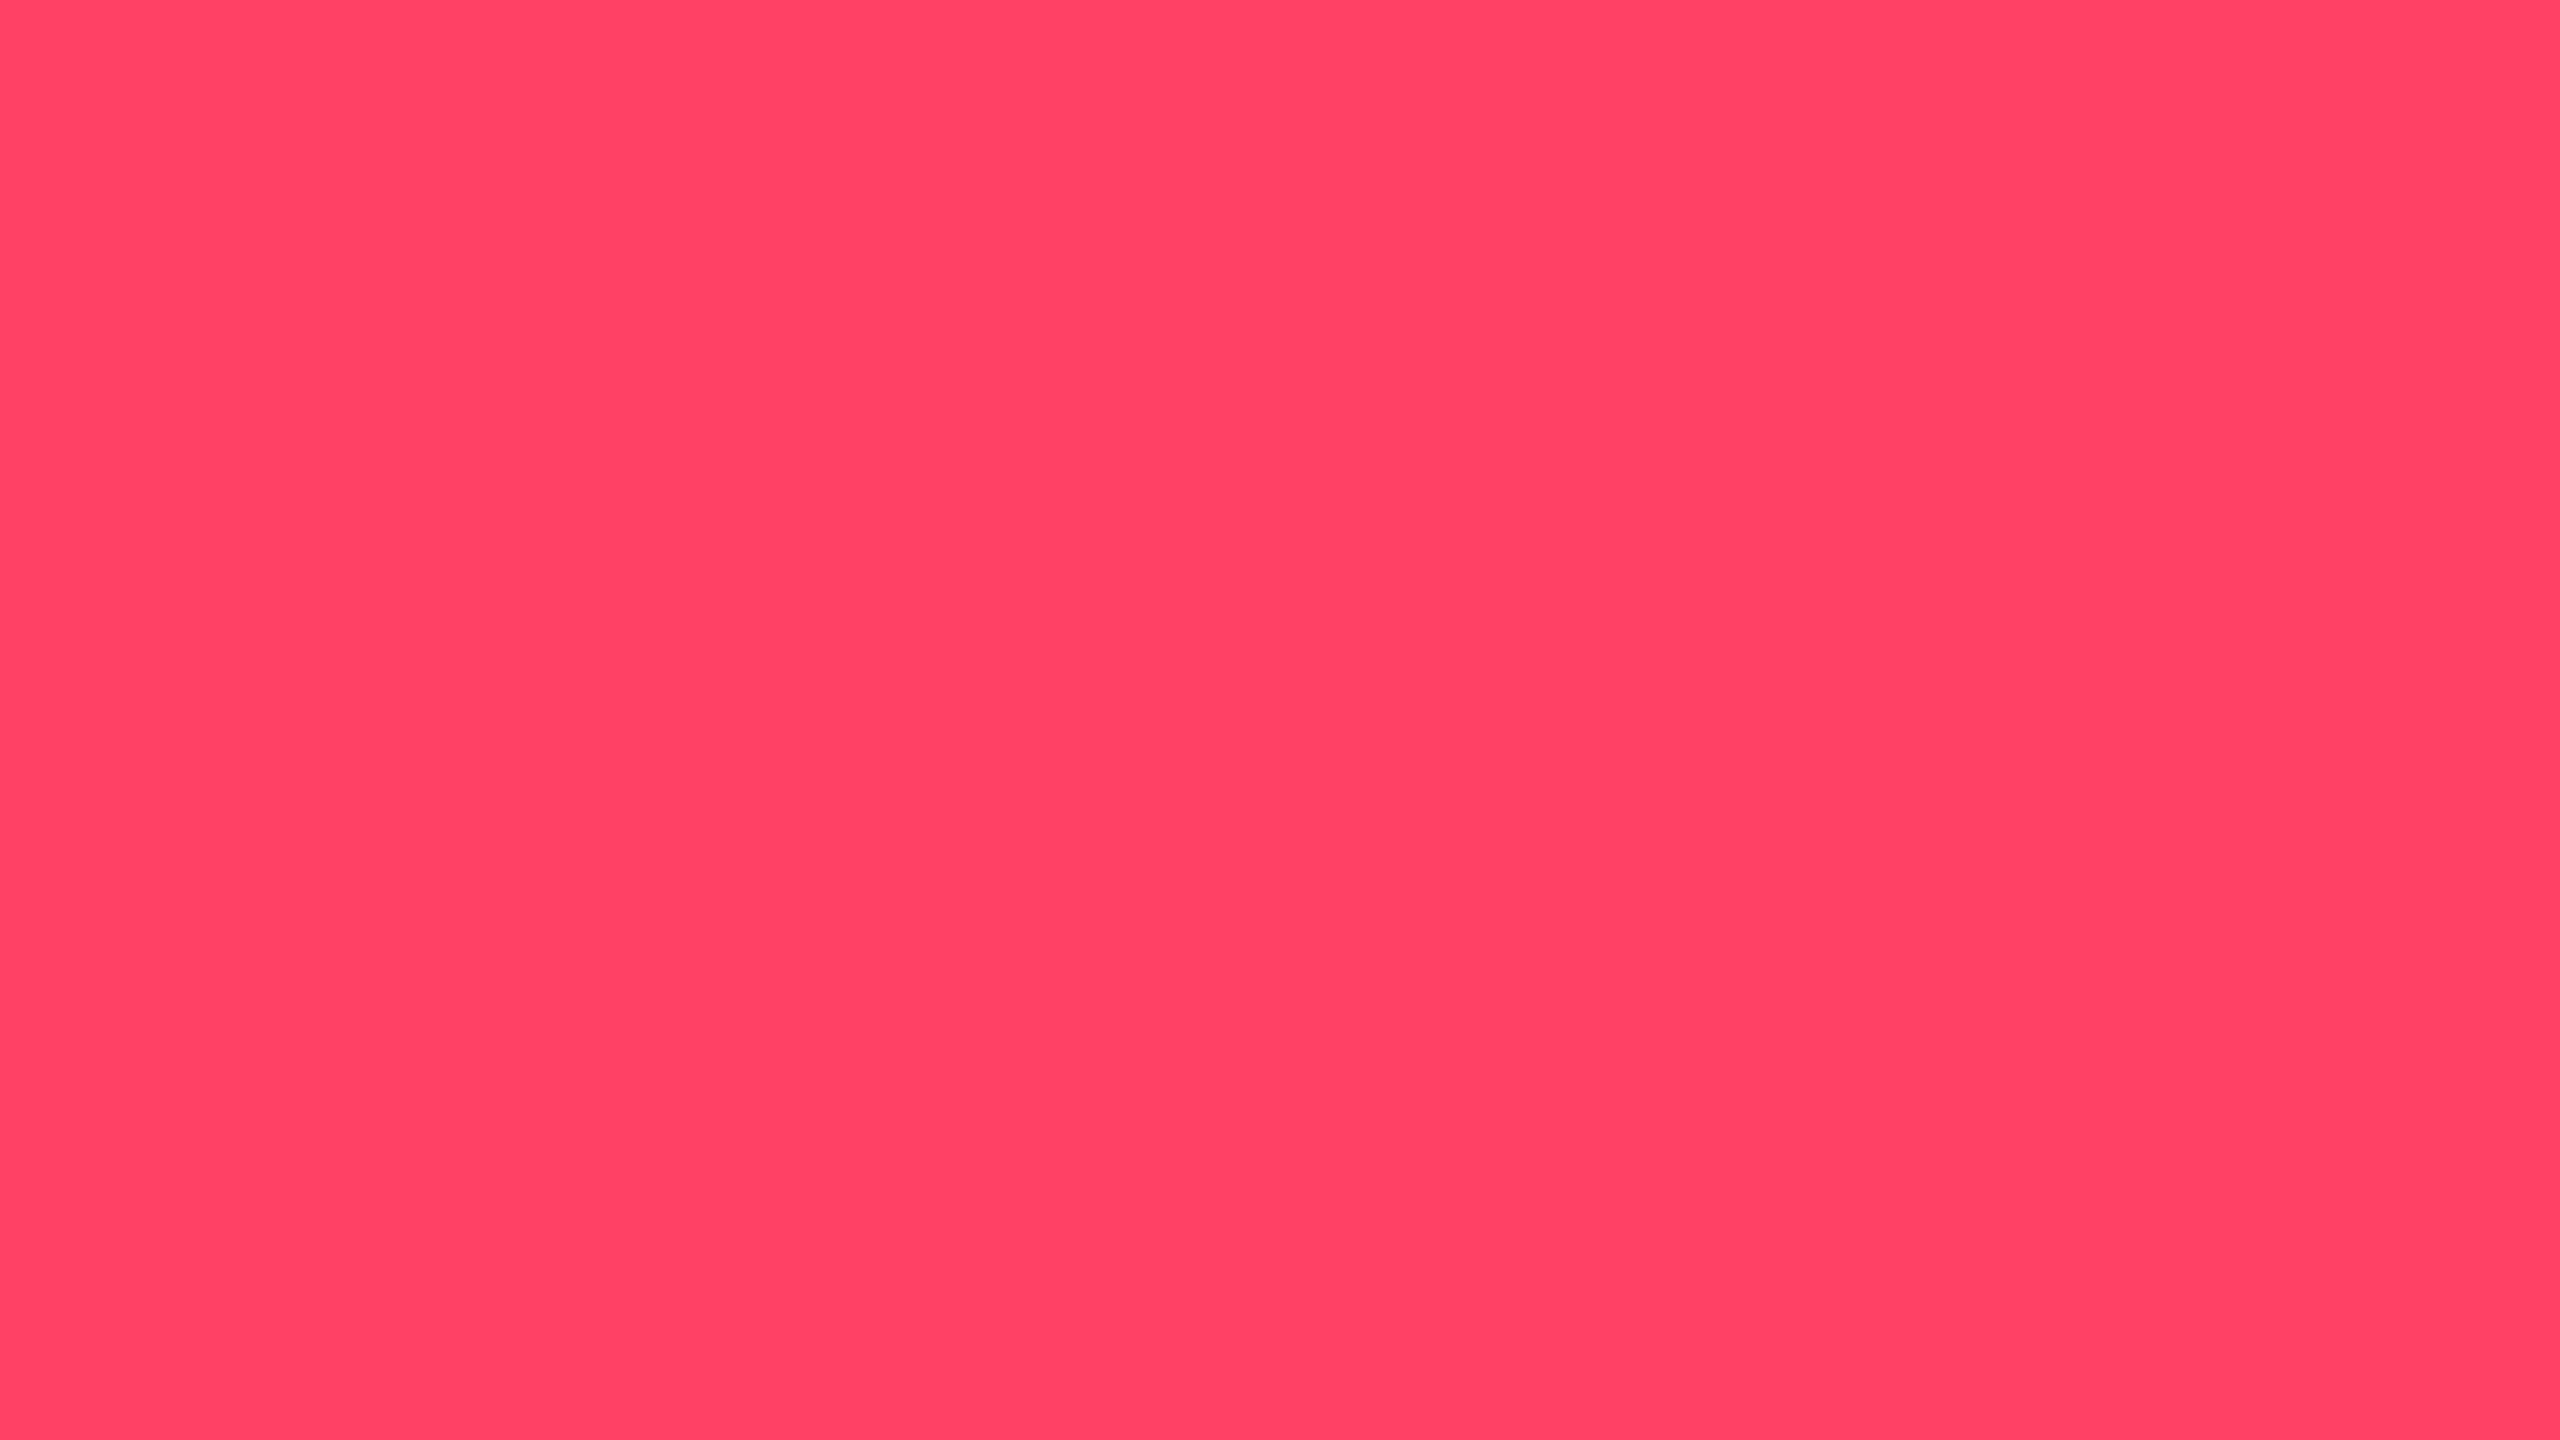  2560x1440 resolution Neon Fuchsia solid color background view